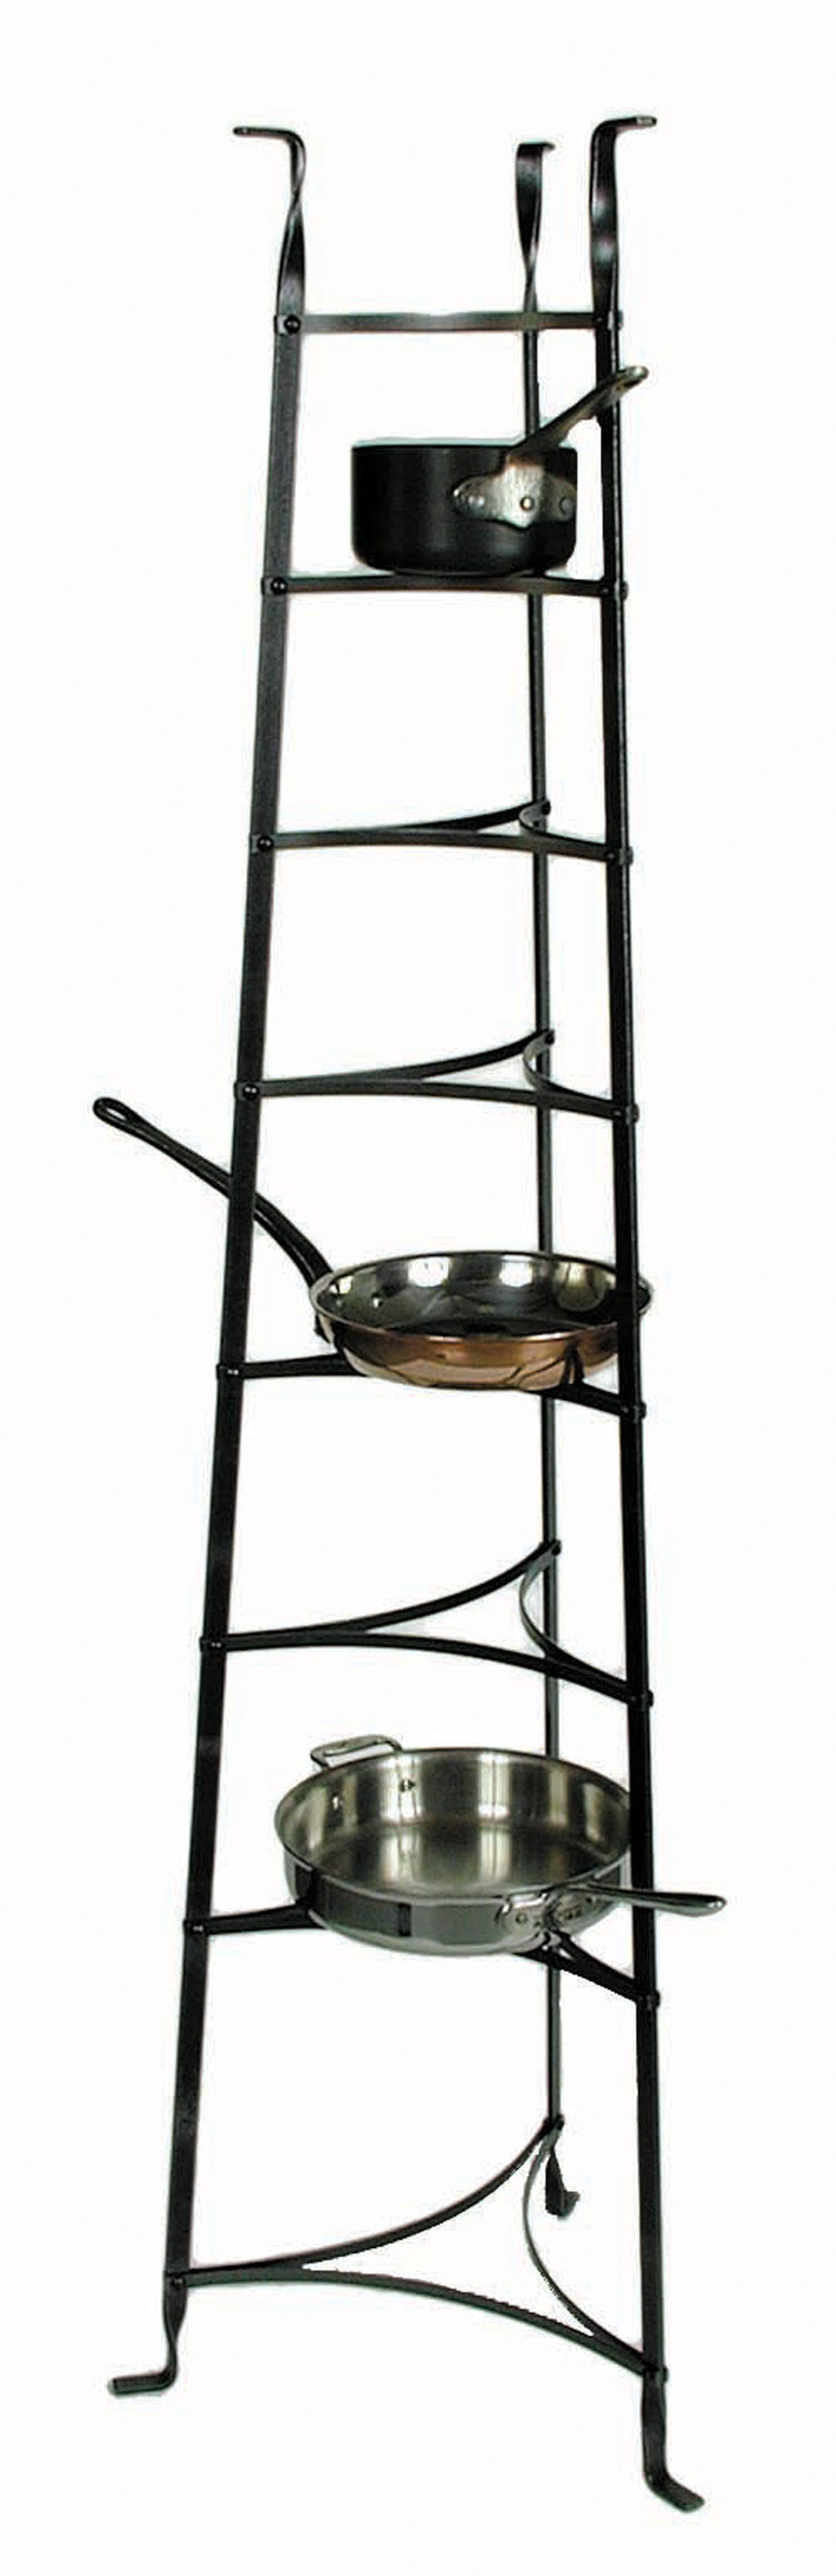 Enclume 8-Tier Cookware Stand in Hammered Steel